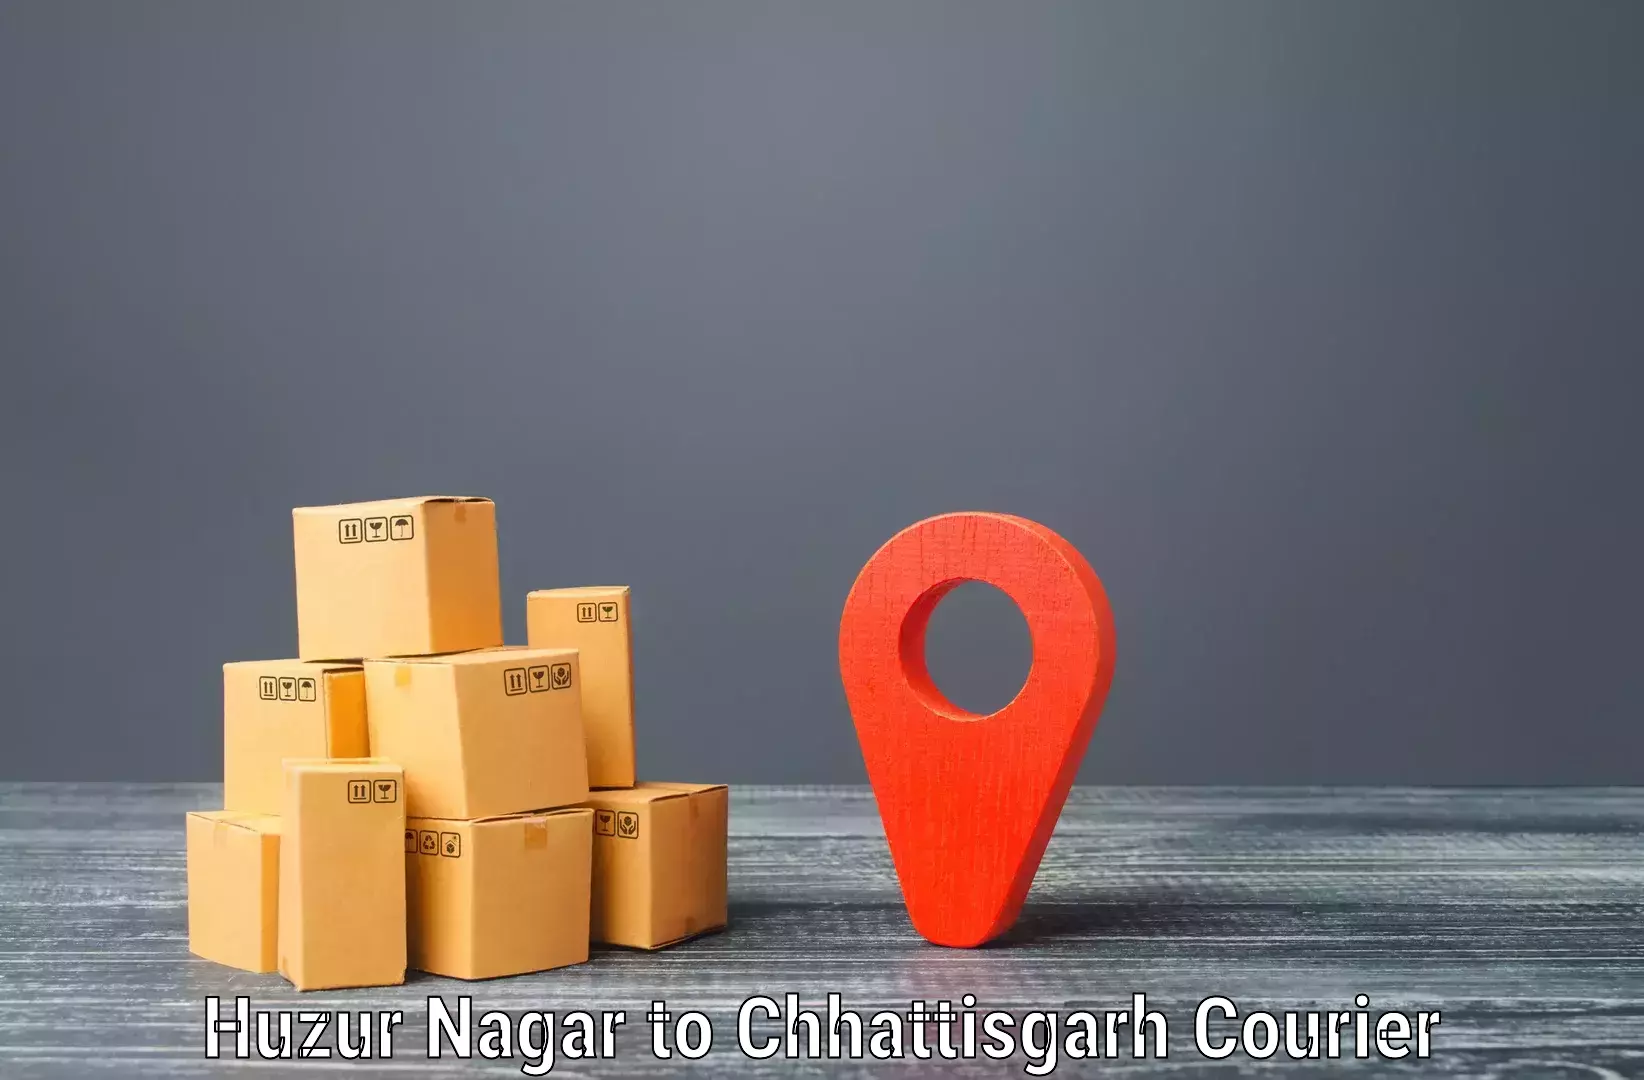 State-of-the-art courier technology Huzur Nagar to Dabhra